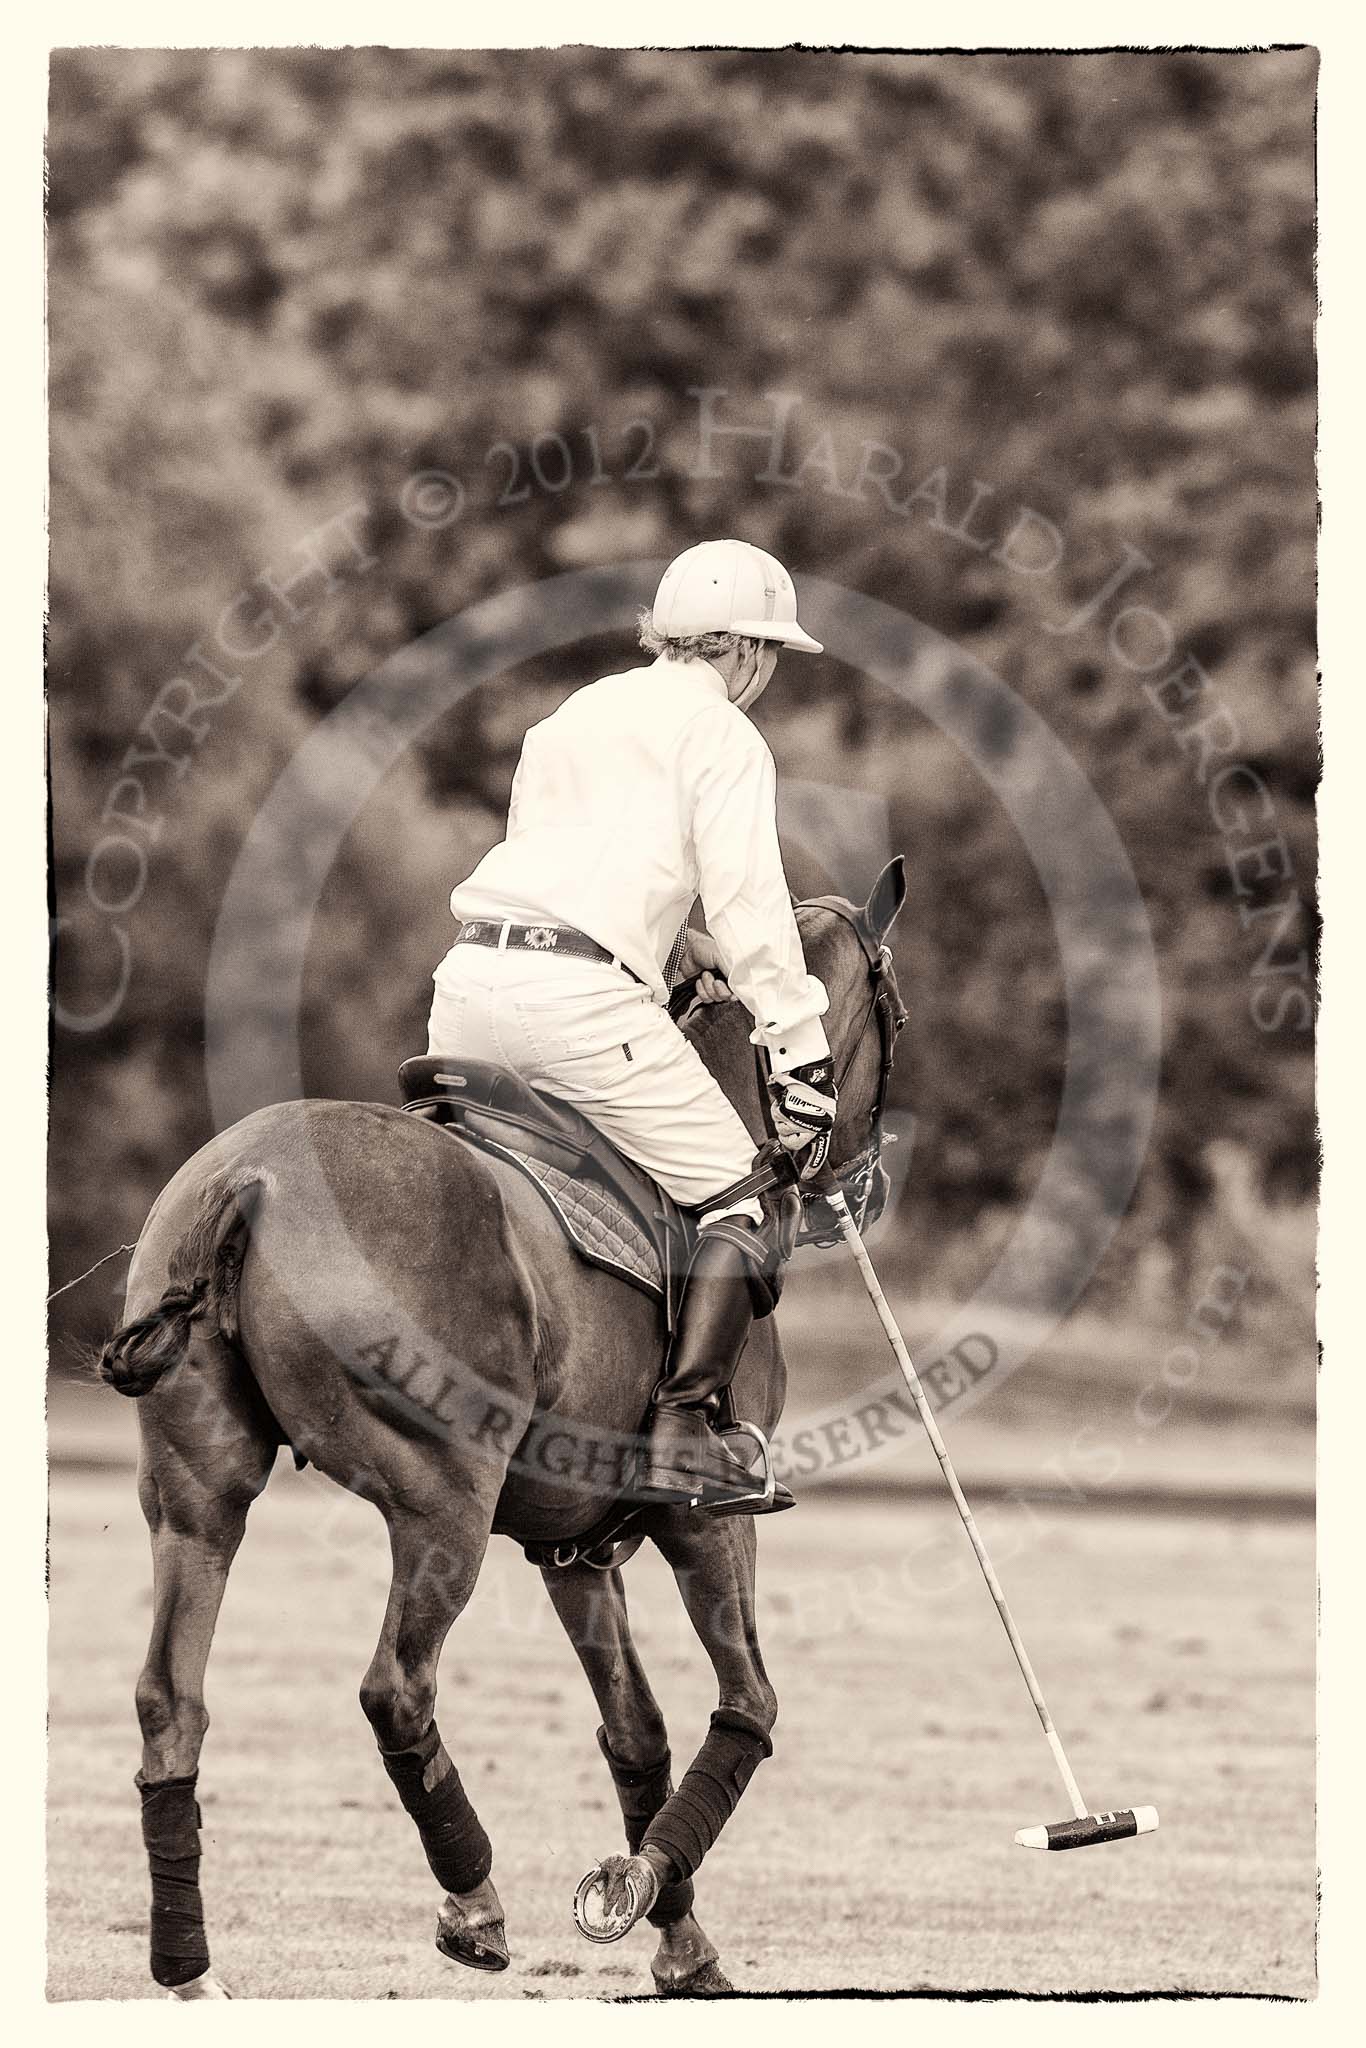 7th Heritage Polo Cup semi-finals: La Golondrina Argentina Polo Patron Paul Oberschneider in T.M.Lewin LuxuryWhite Twill Shirt..
Hurtwood Park Polo Club,
Ewhurst Green,
Surrey,
United Kingdom,
on 04 August 2012 at 15:25, image #233